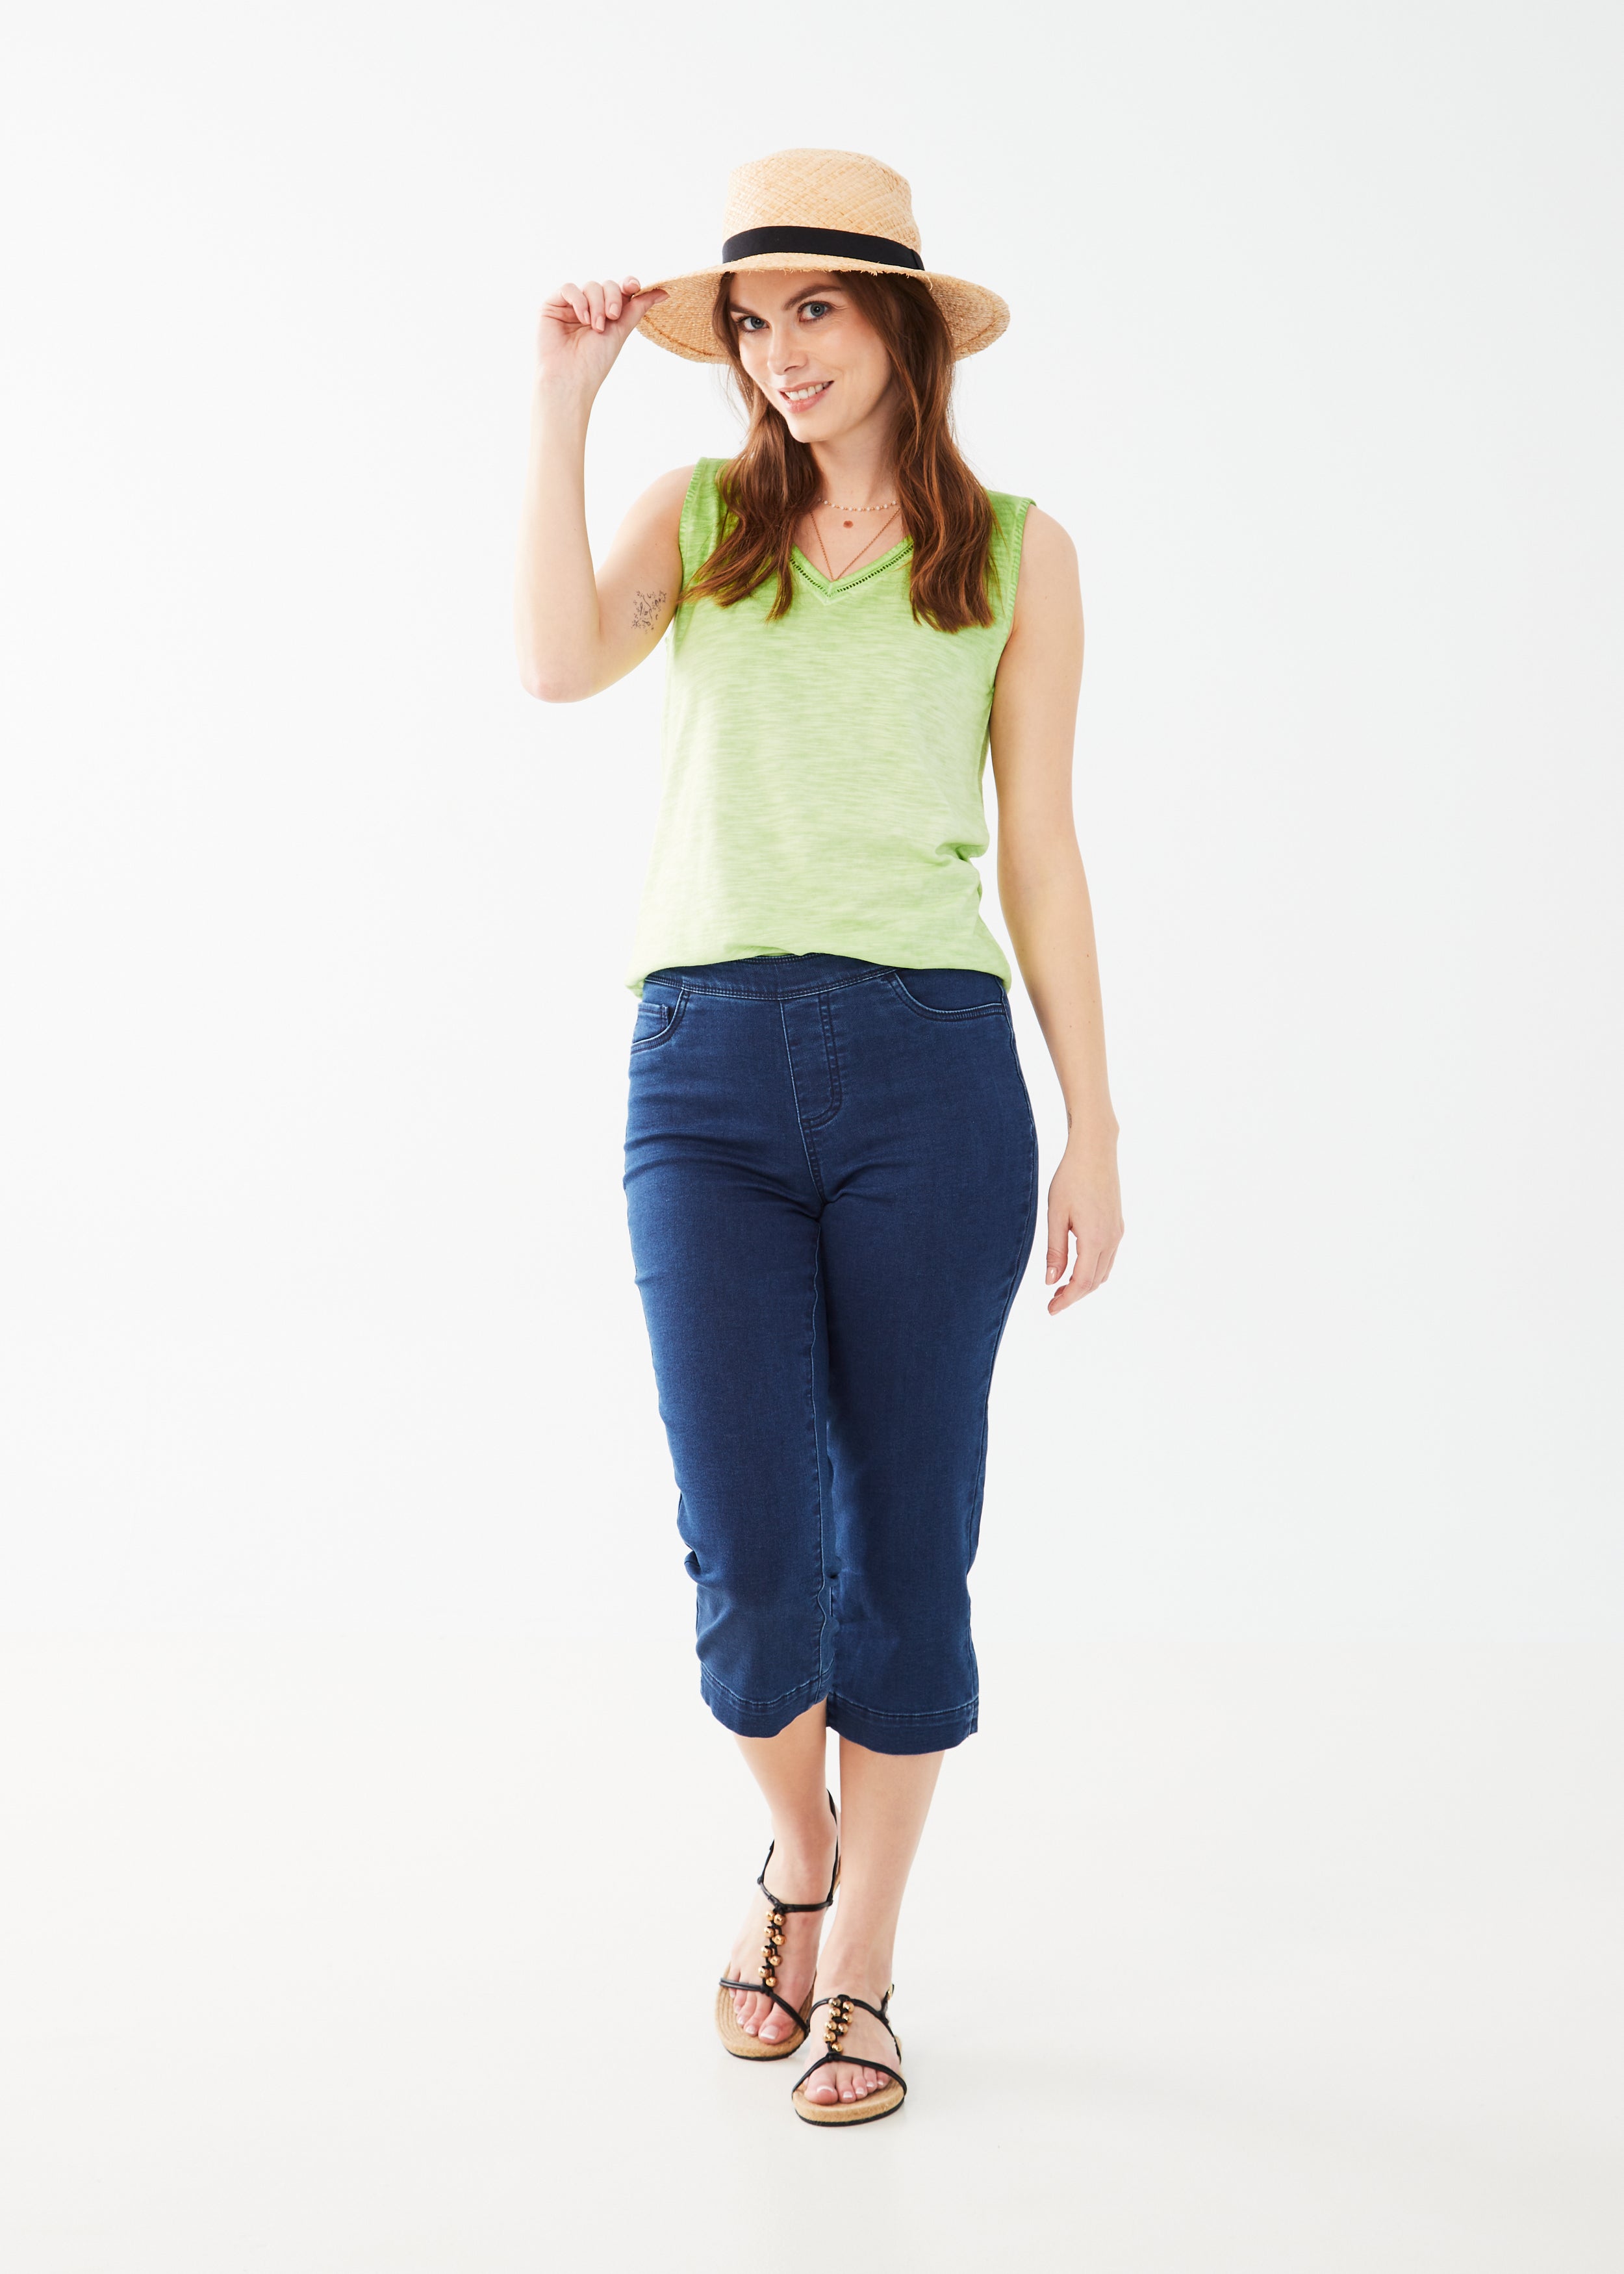 Women's Capris, Shorts & Skirts – Broderick's Clothing Co.